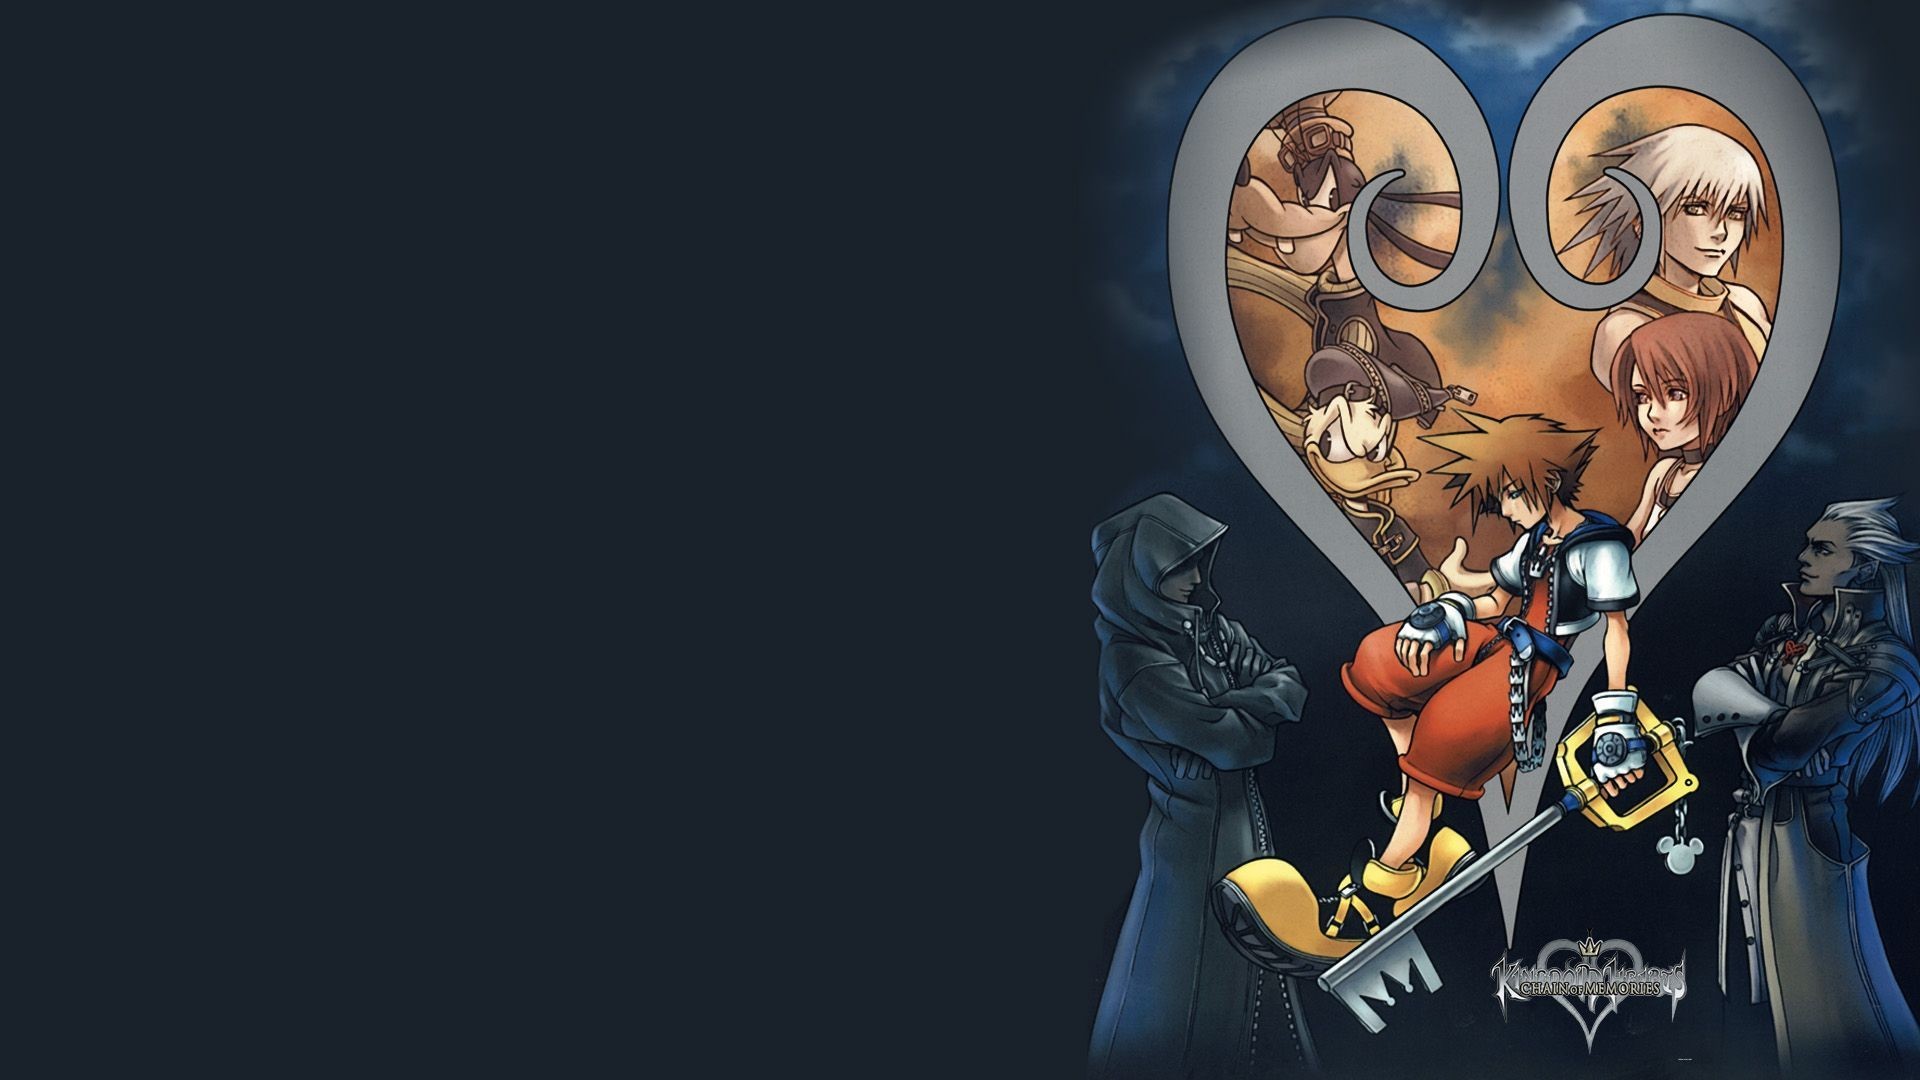 1920x1080 Kingdom Hearts 2 Backgrounds (51 Wallpapers)